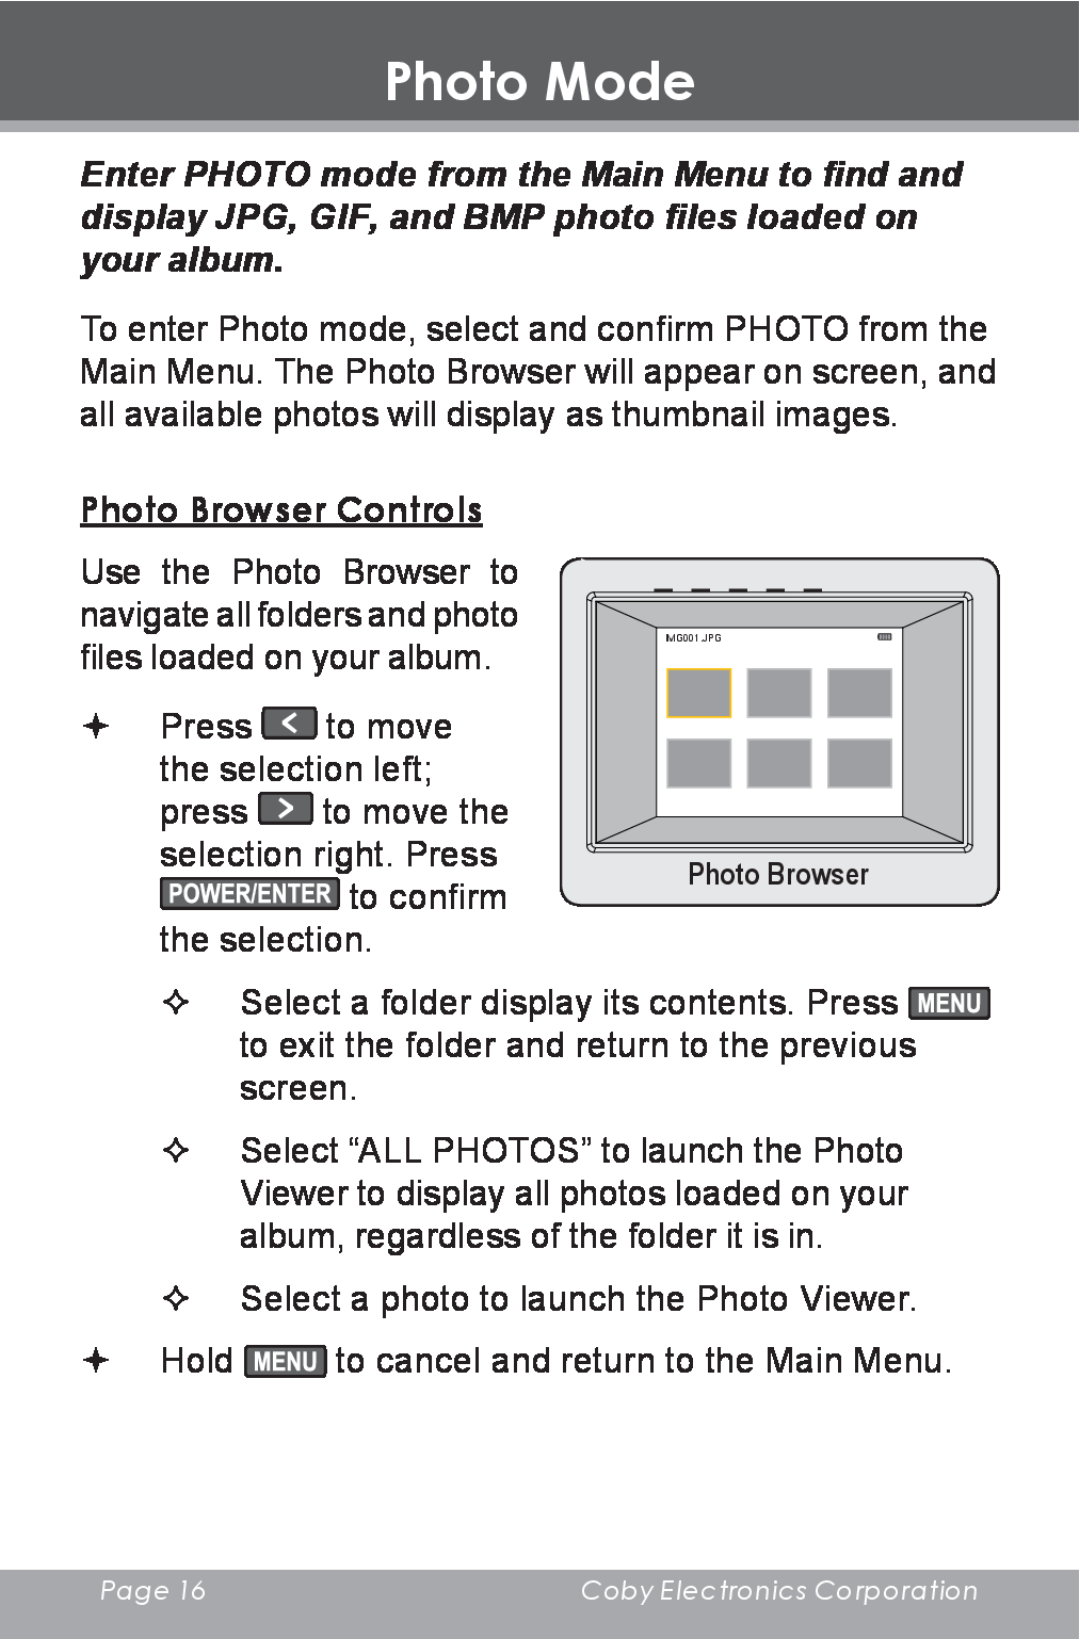 COBY electronic DP-240 instruction manual Photo Mode, Photo Browser Controls 